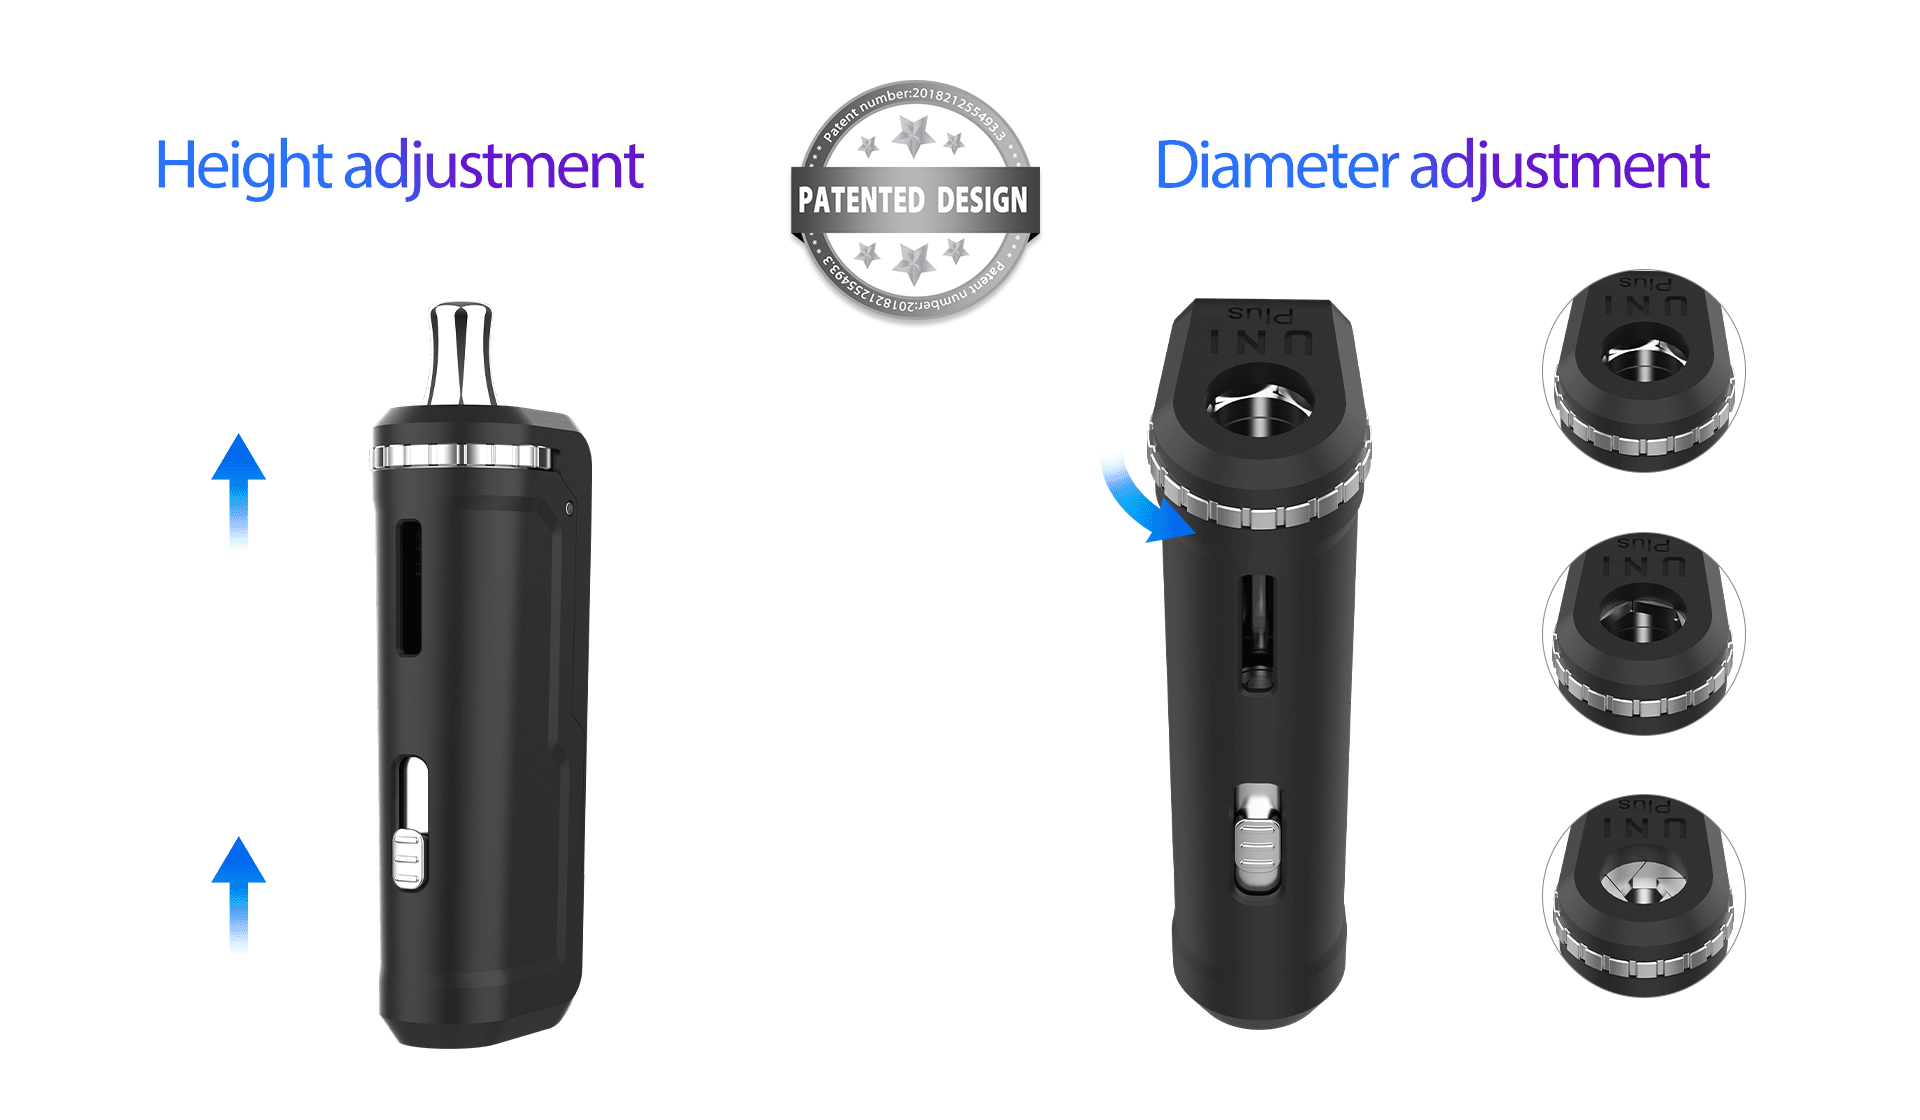 Yocan UNI Plus VV Battery comes with the height adjustment and diameter adjustment.